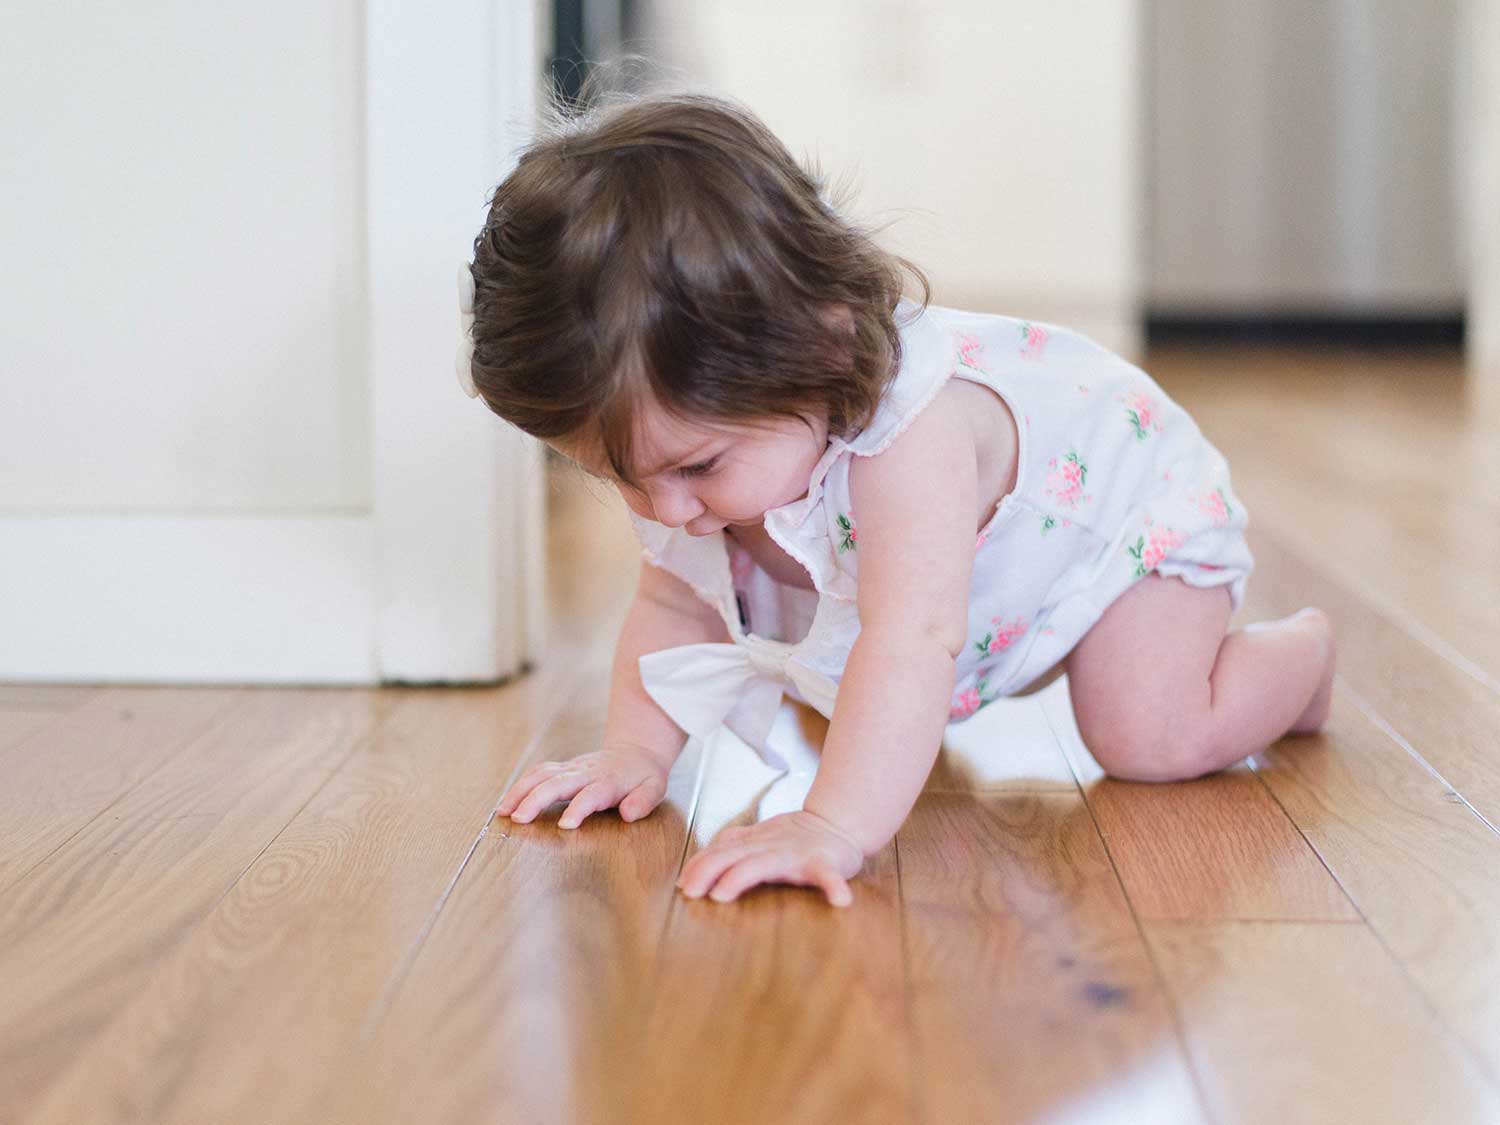 Baby crawling on the floor.